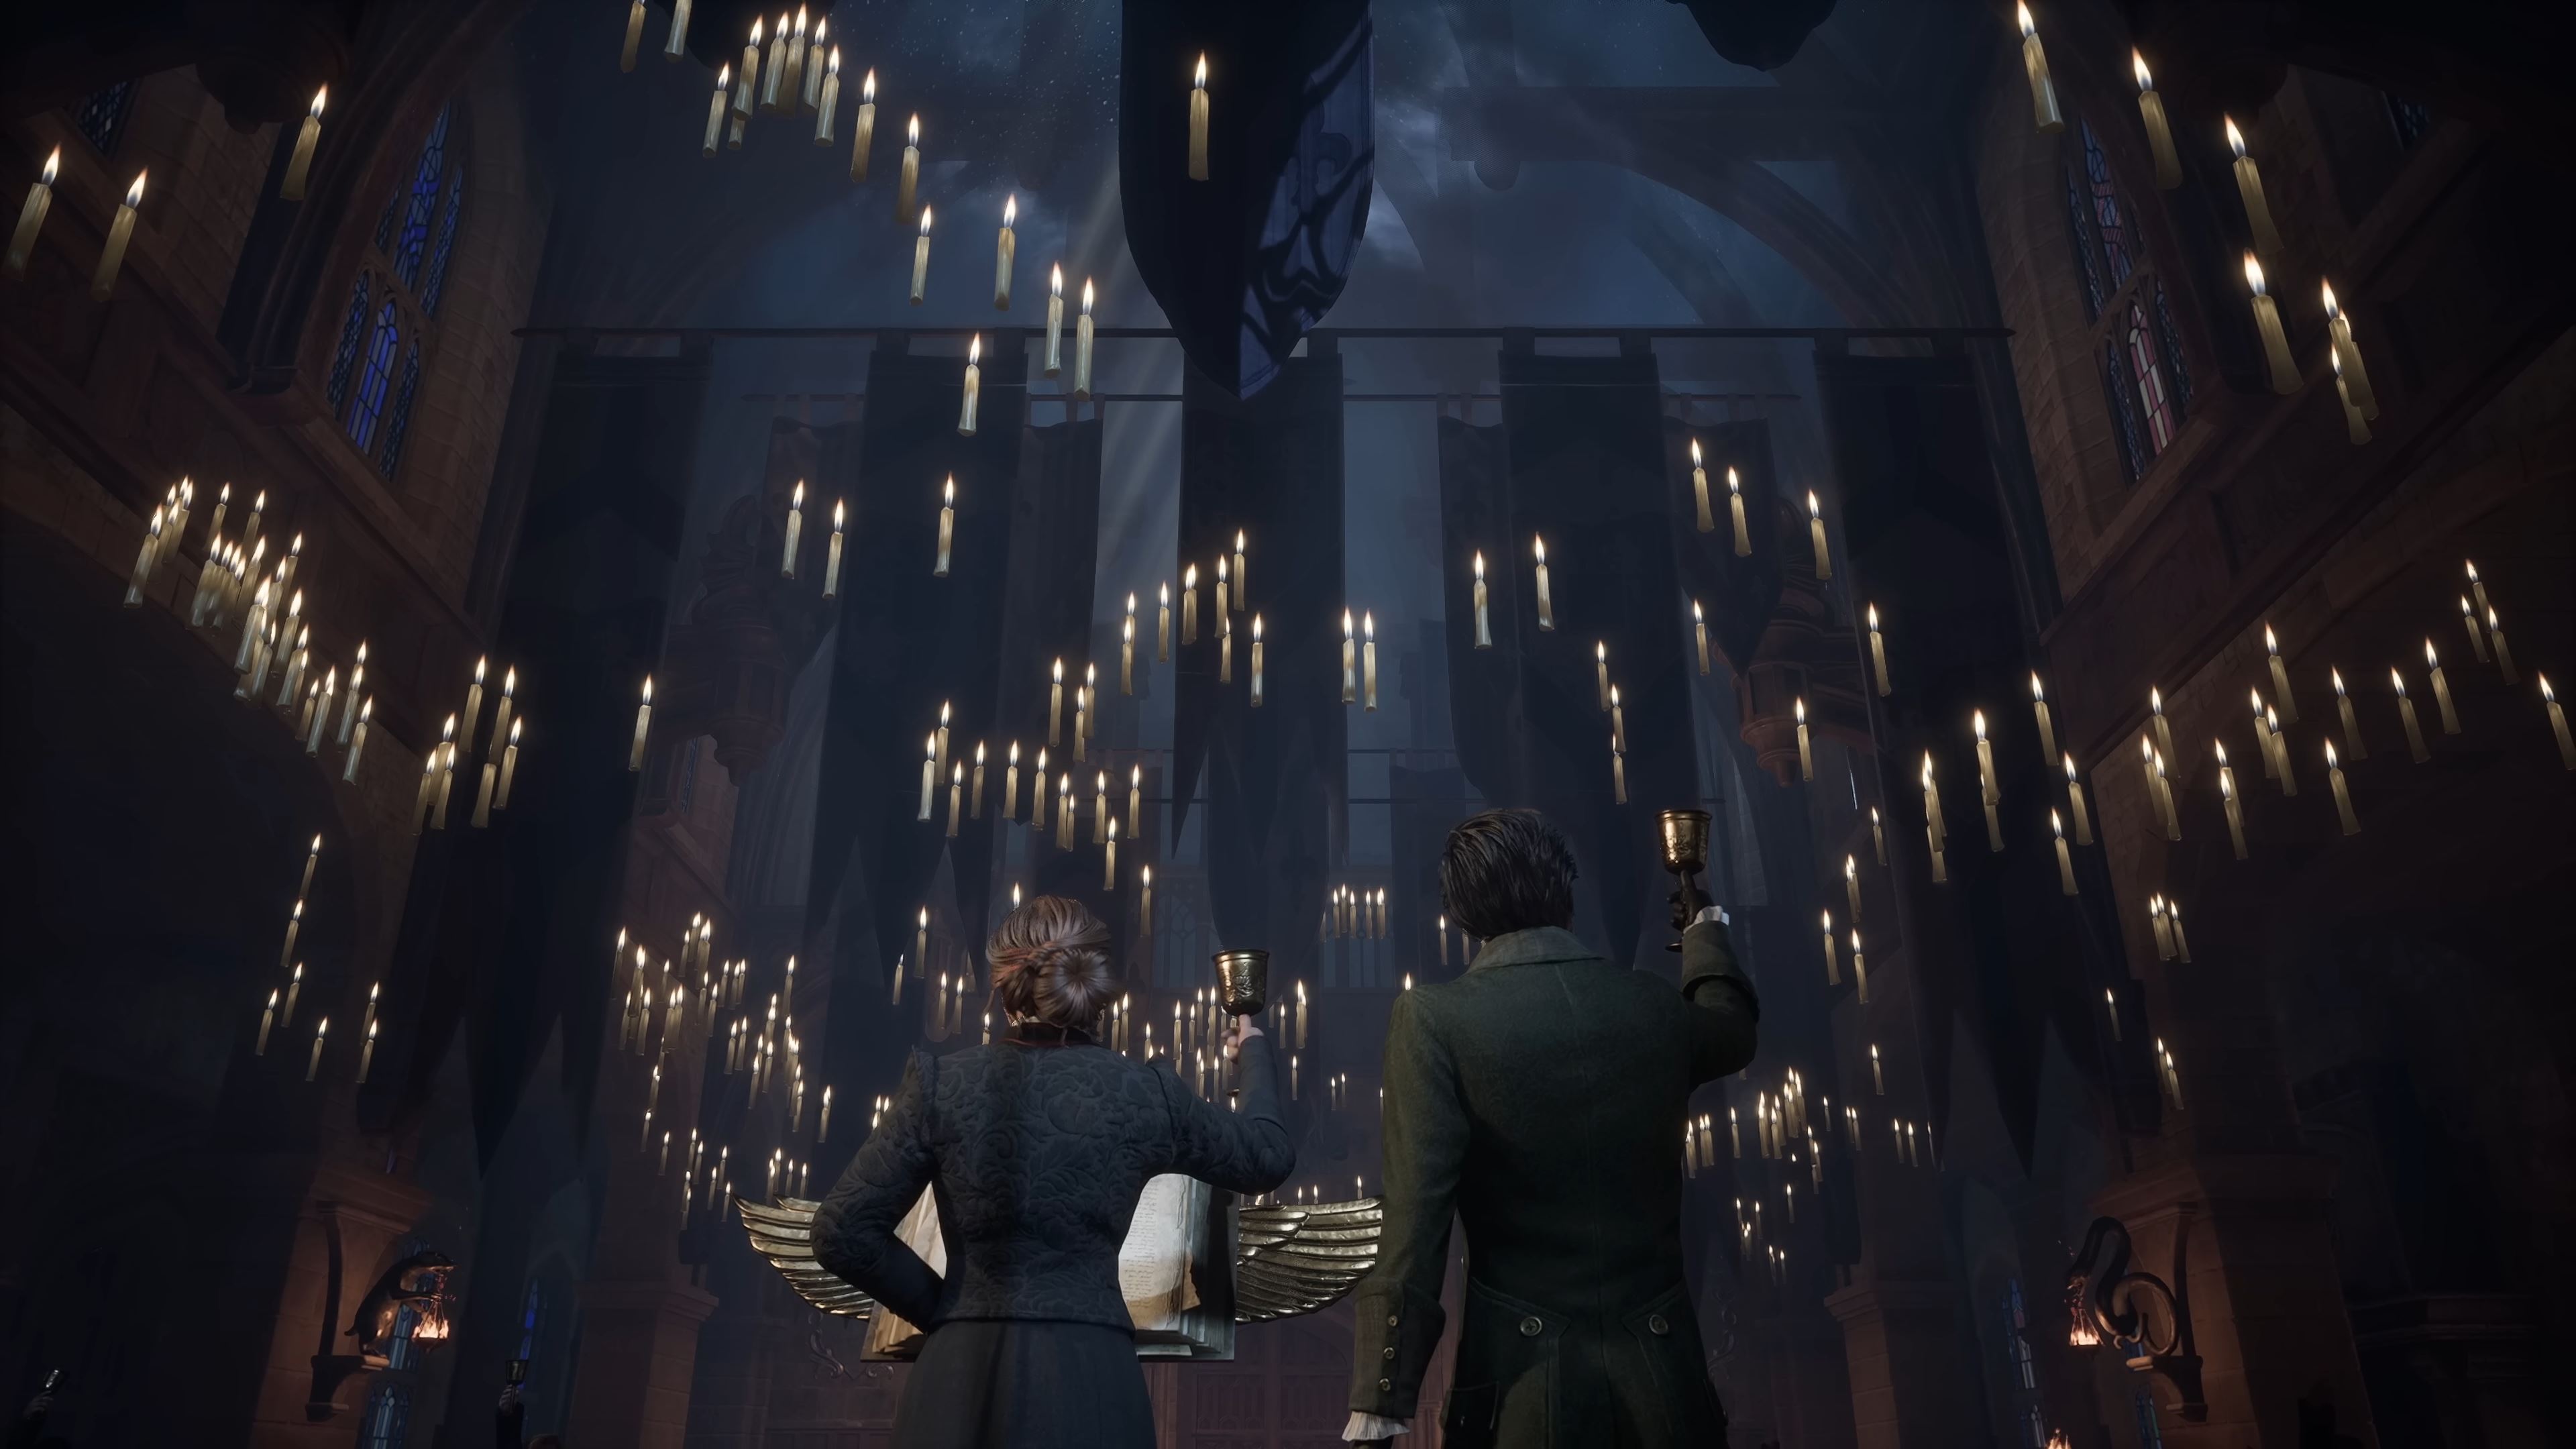 Hogwarts Legacy continues to top the charts on its launch day